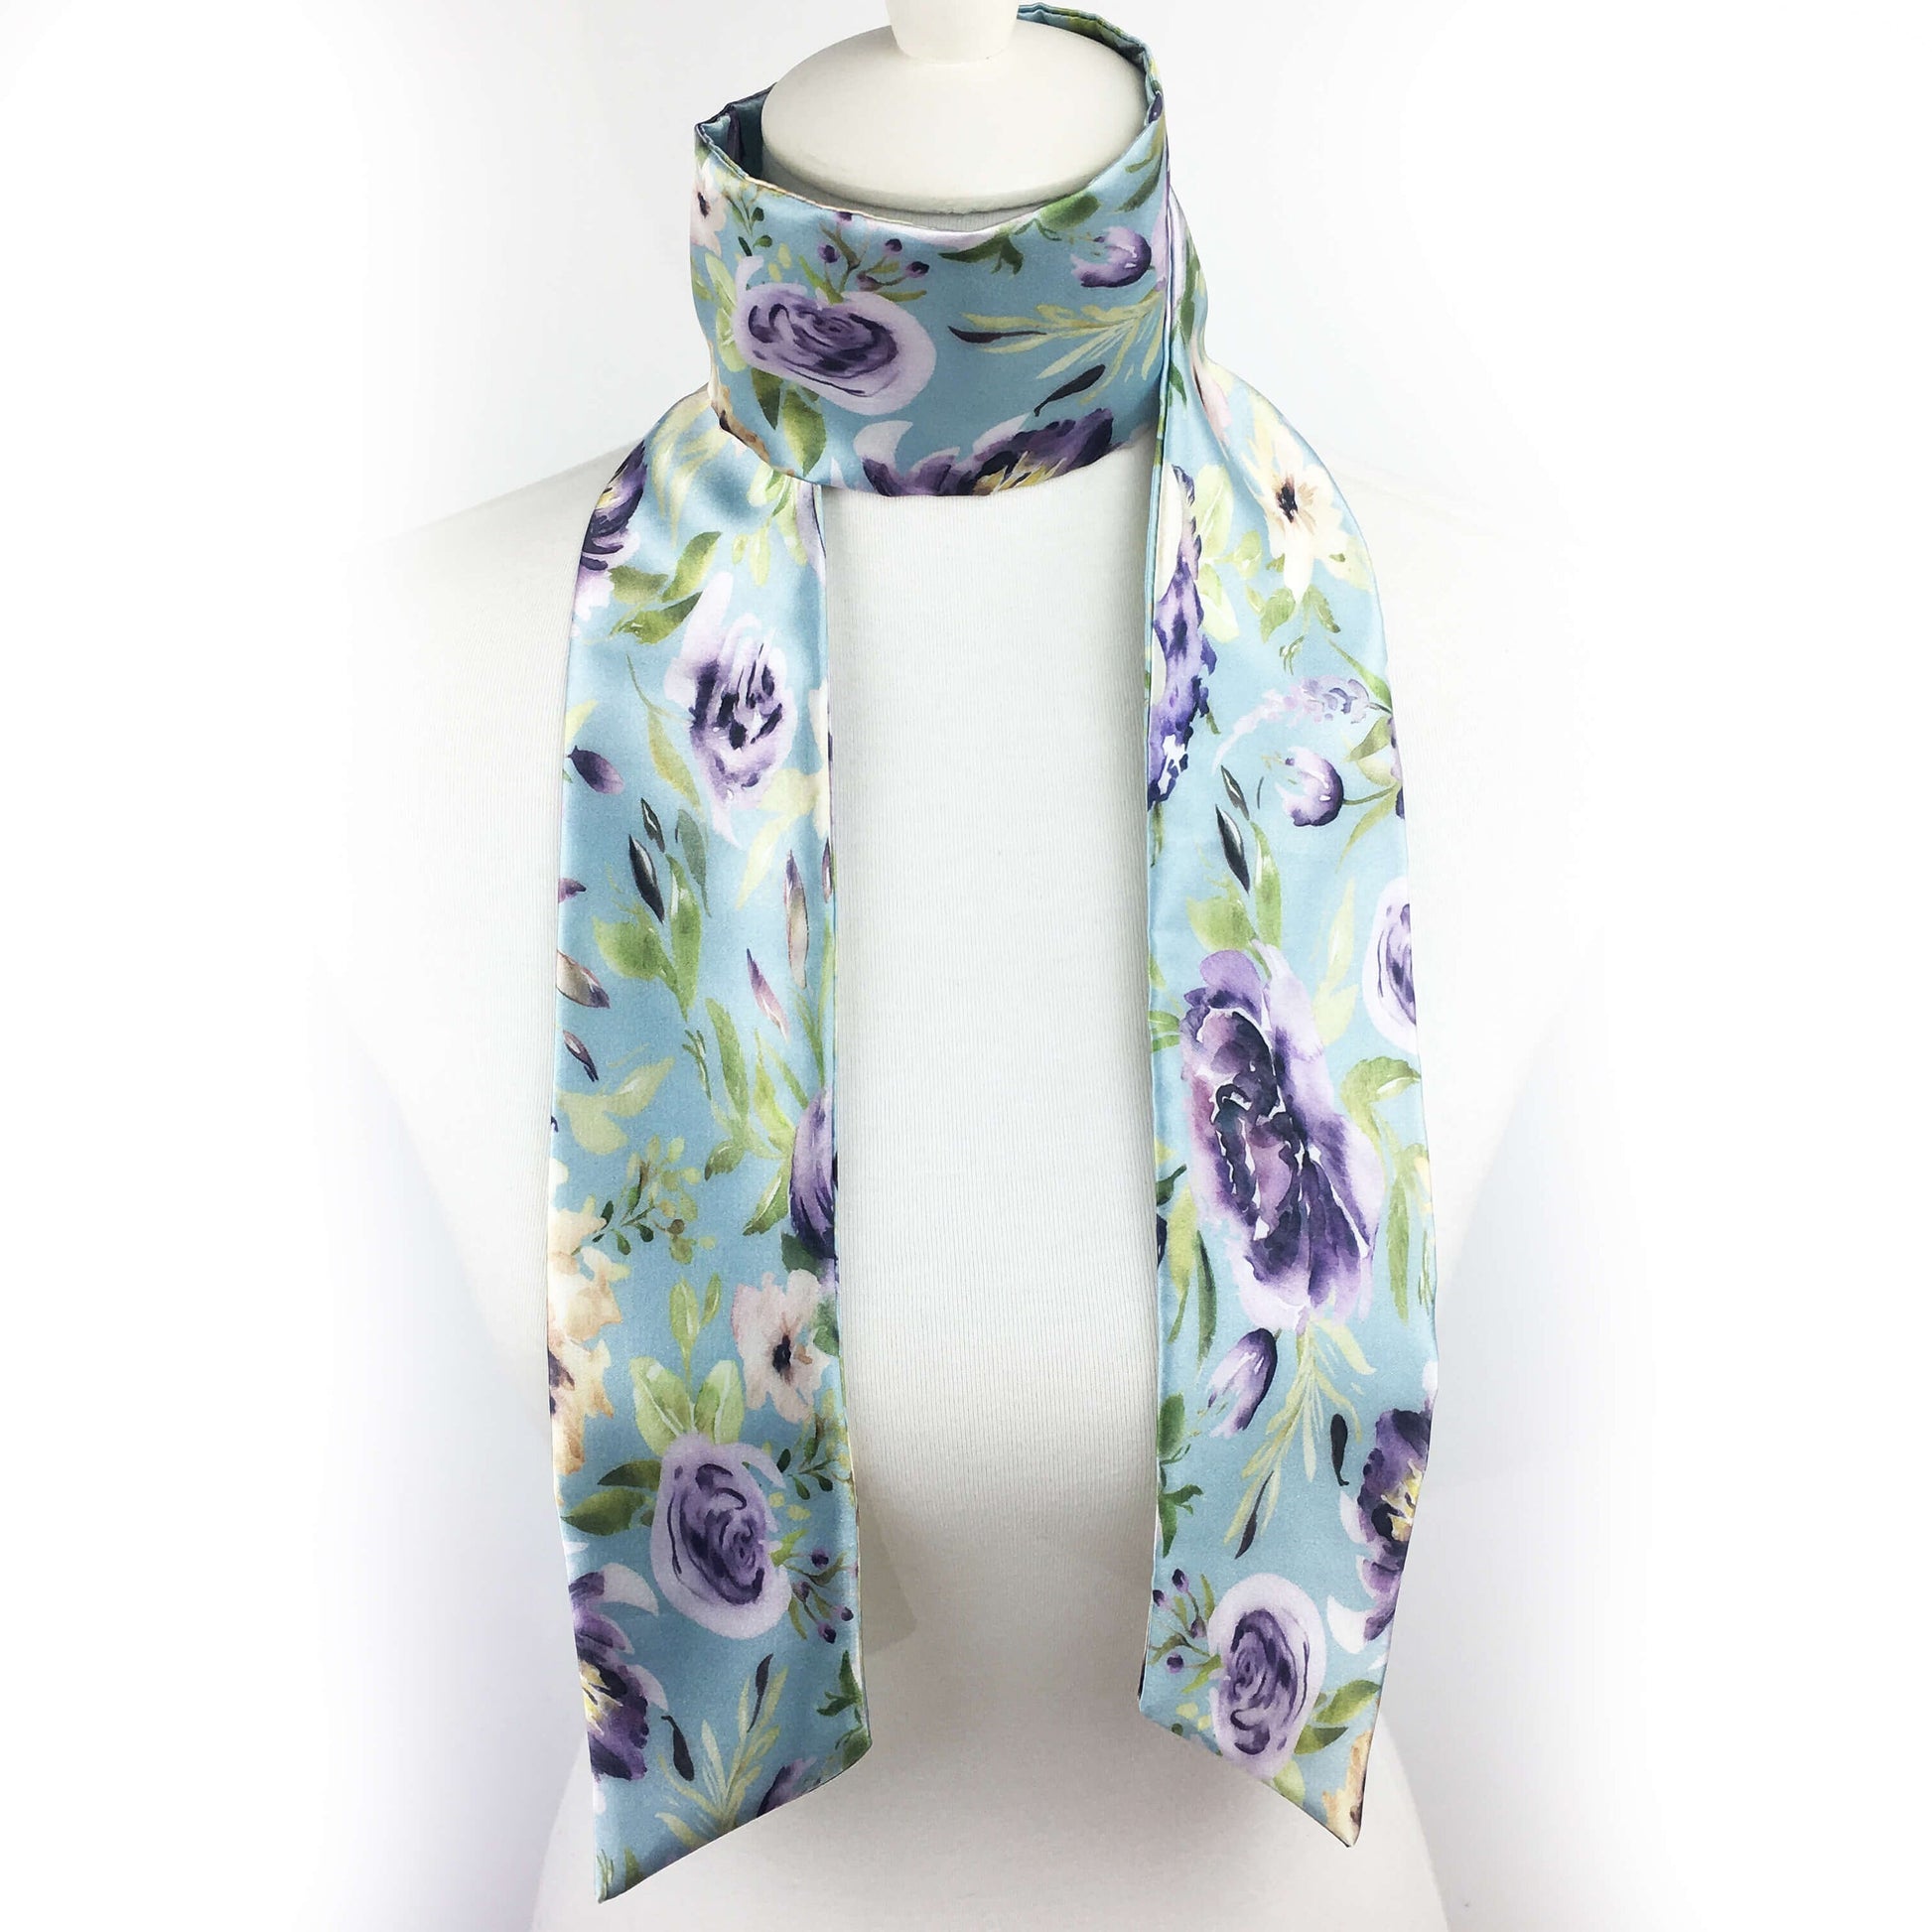 Mixed Watercolor Turquoise,Skinny Scarf,Woman Scarf,All season scarf,LightweightScarf,ladies scarf,artist scarf,painted scarf,satin scarf